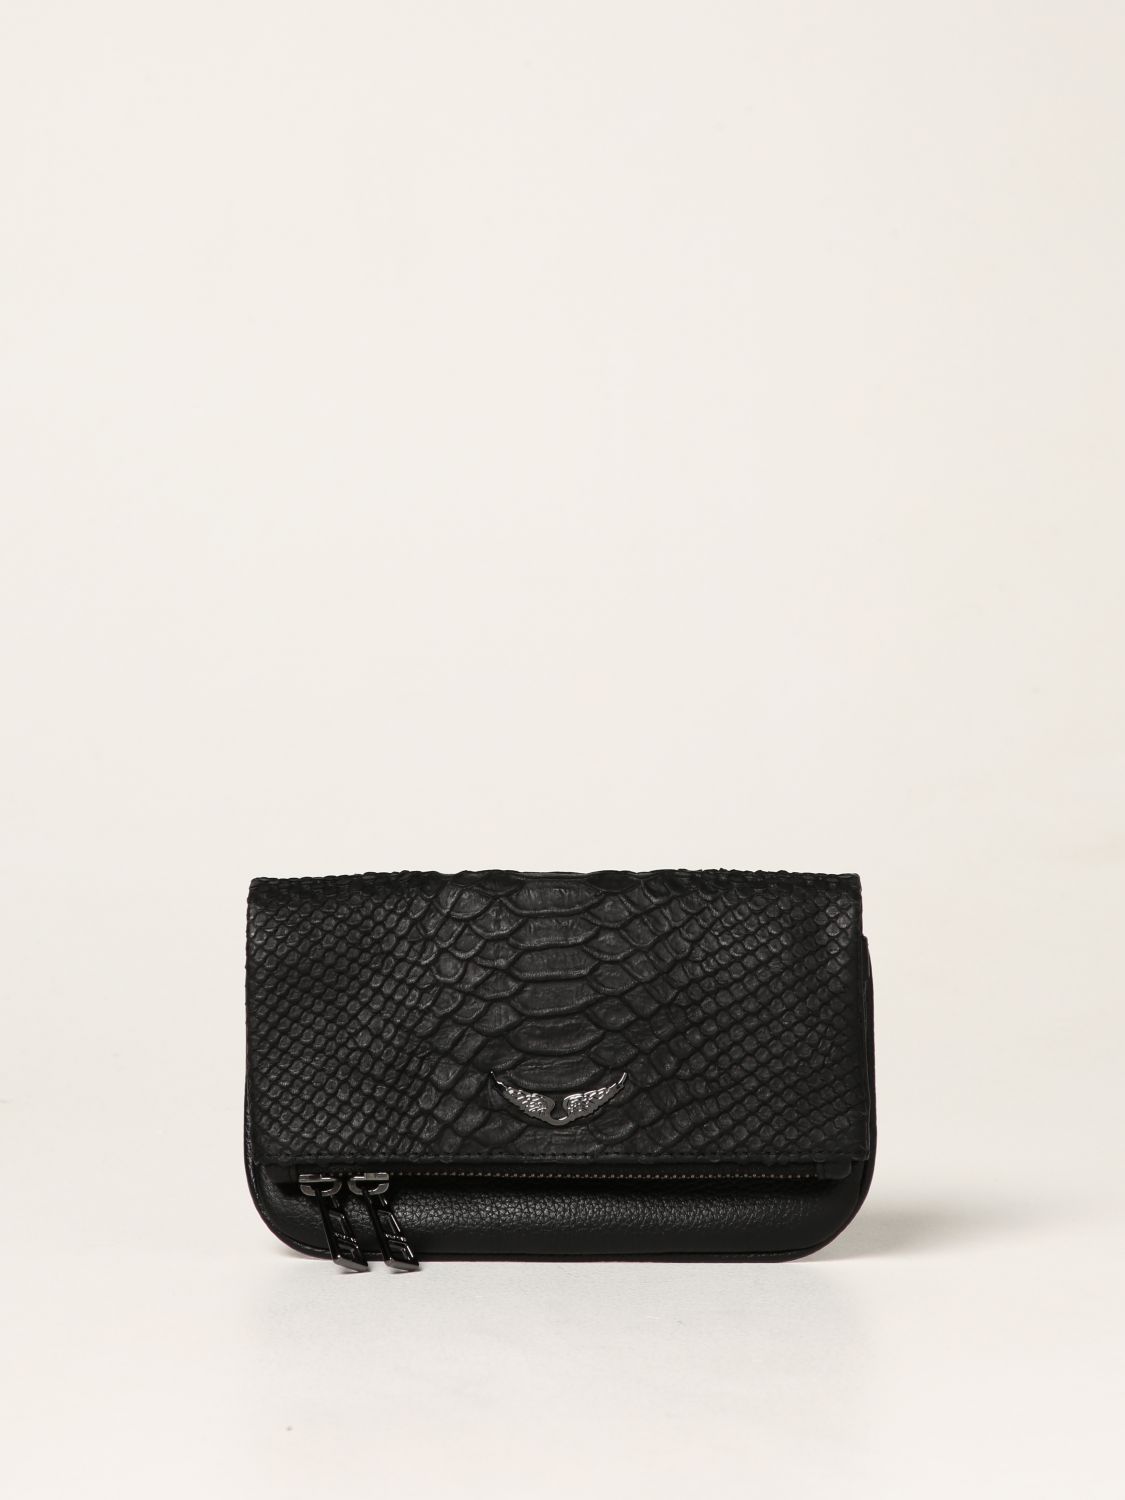 Rock nano bag Zadig & Voltaire in python print leather